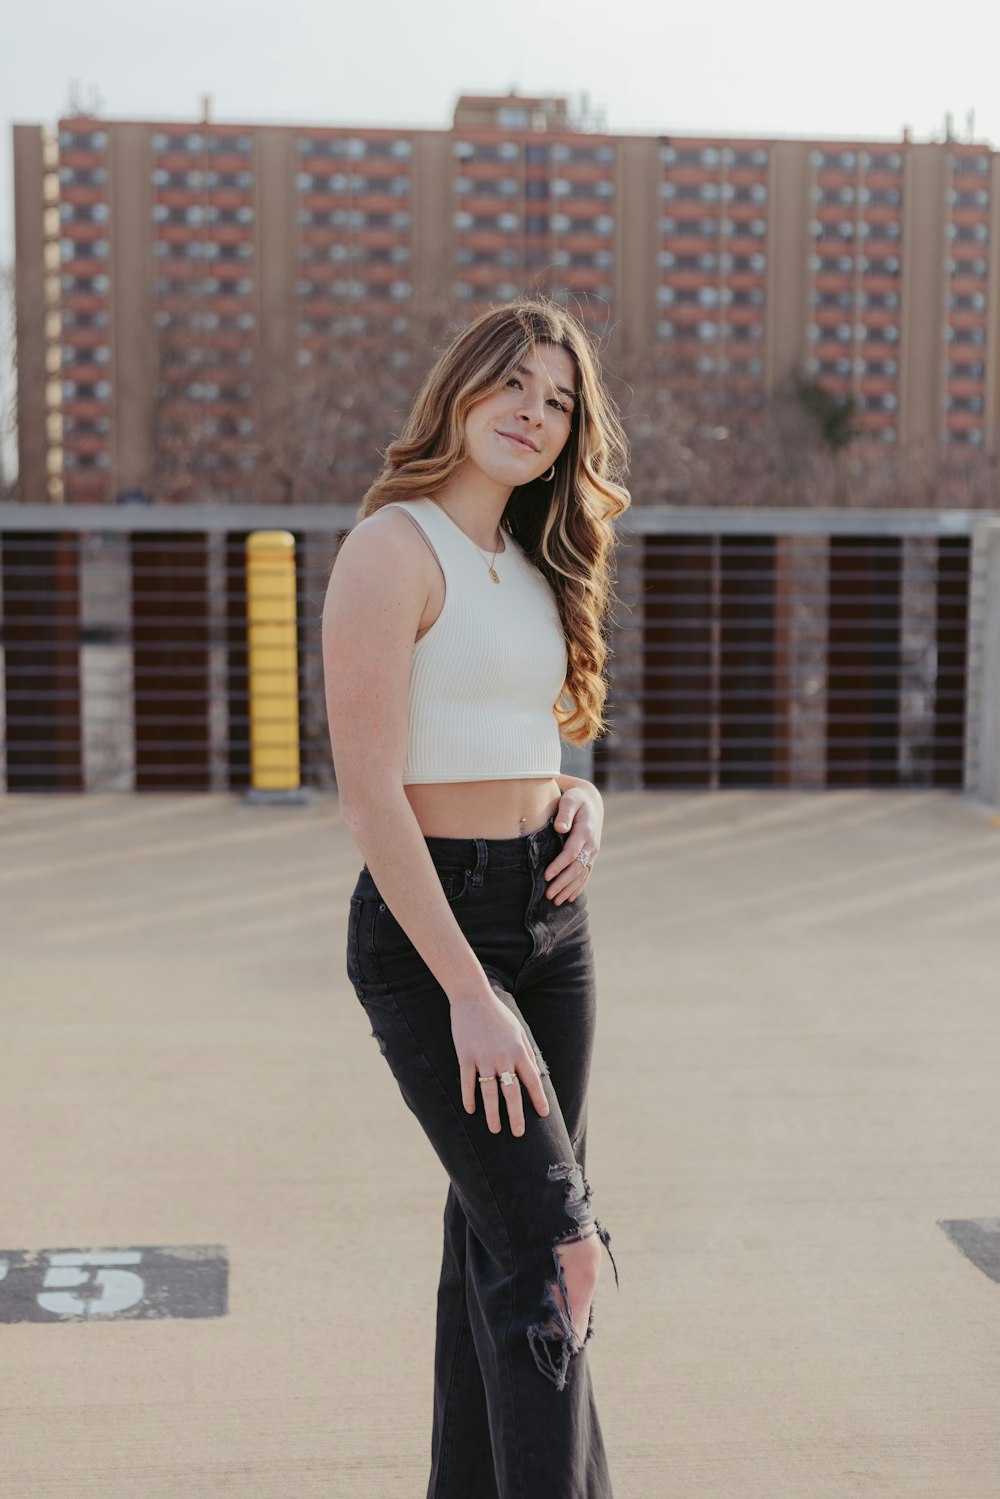 a woman standing in a parking lot wearing black pants and a white crop top